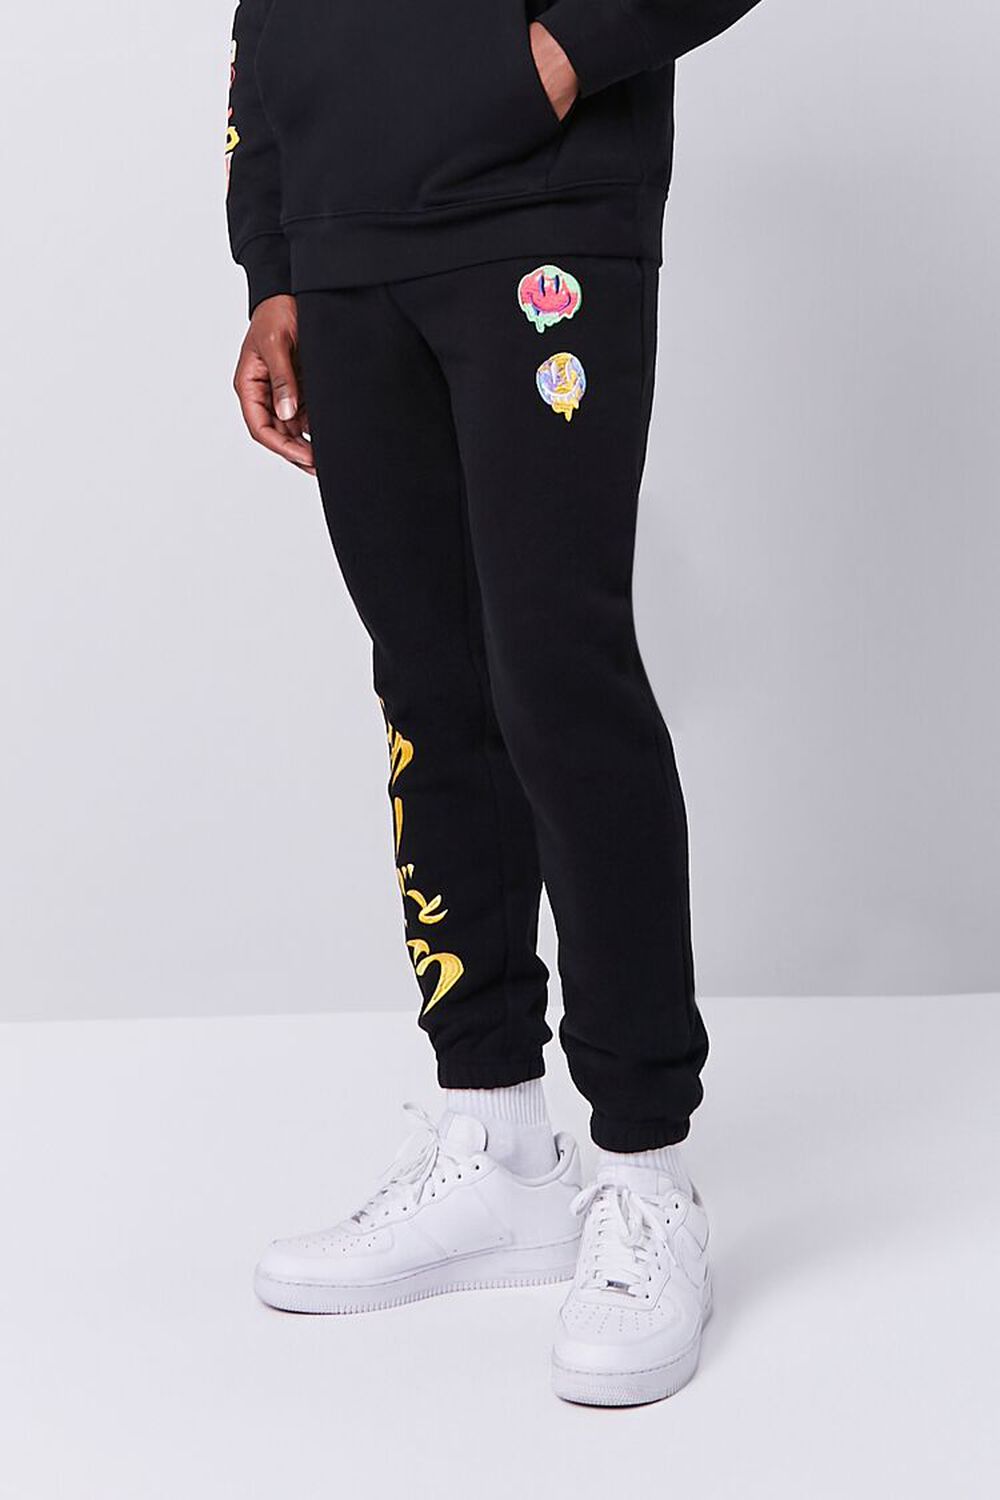 BLACK/MULTI Smiling Face Embroidered Graphic Joggers, image 2